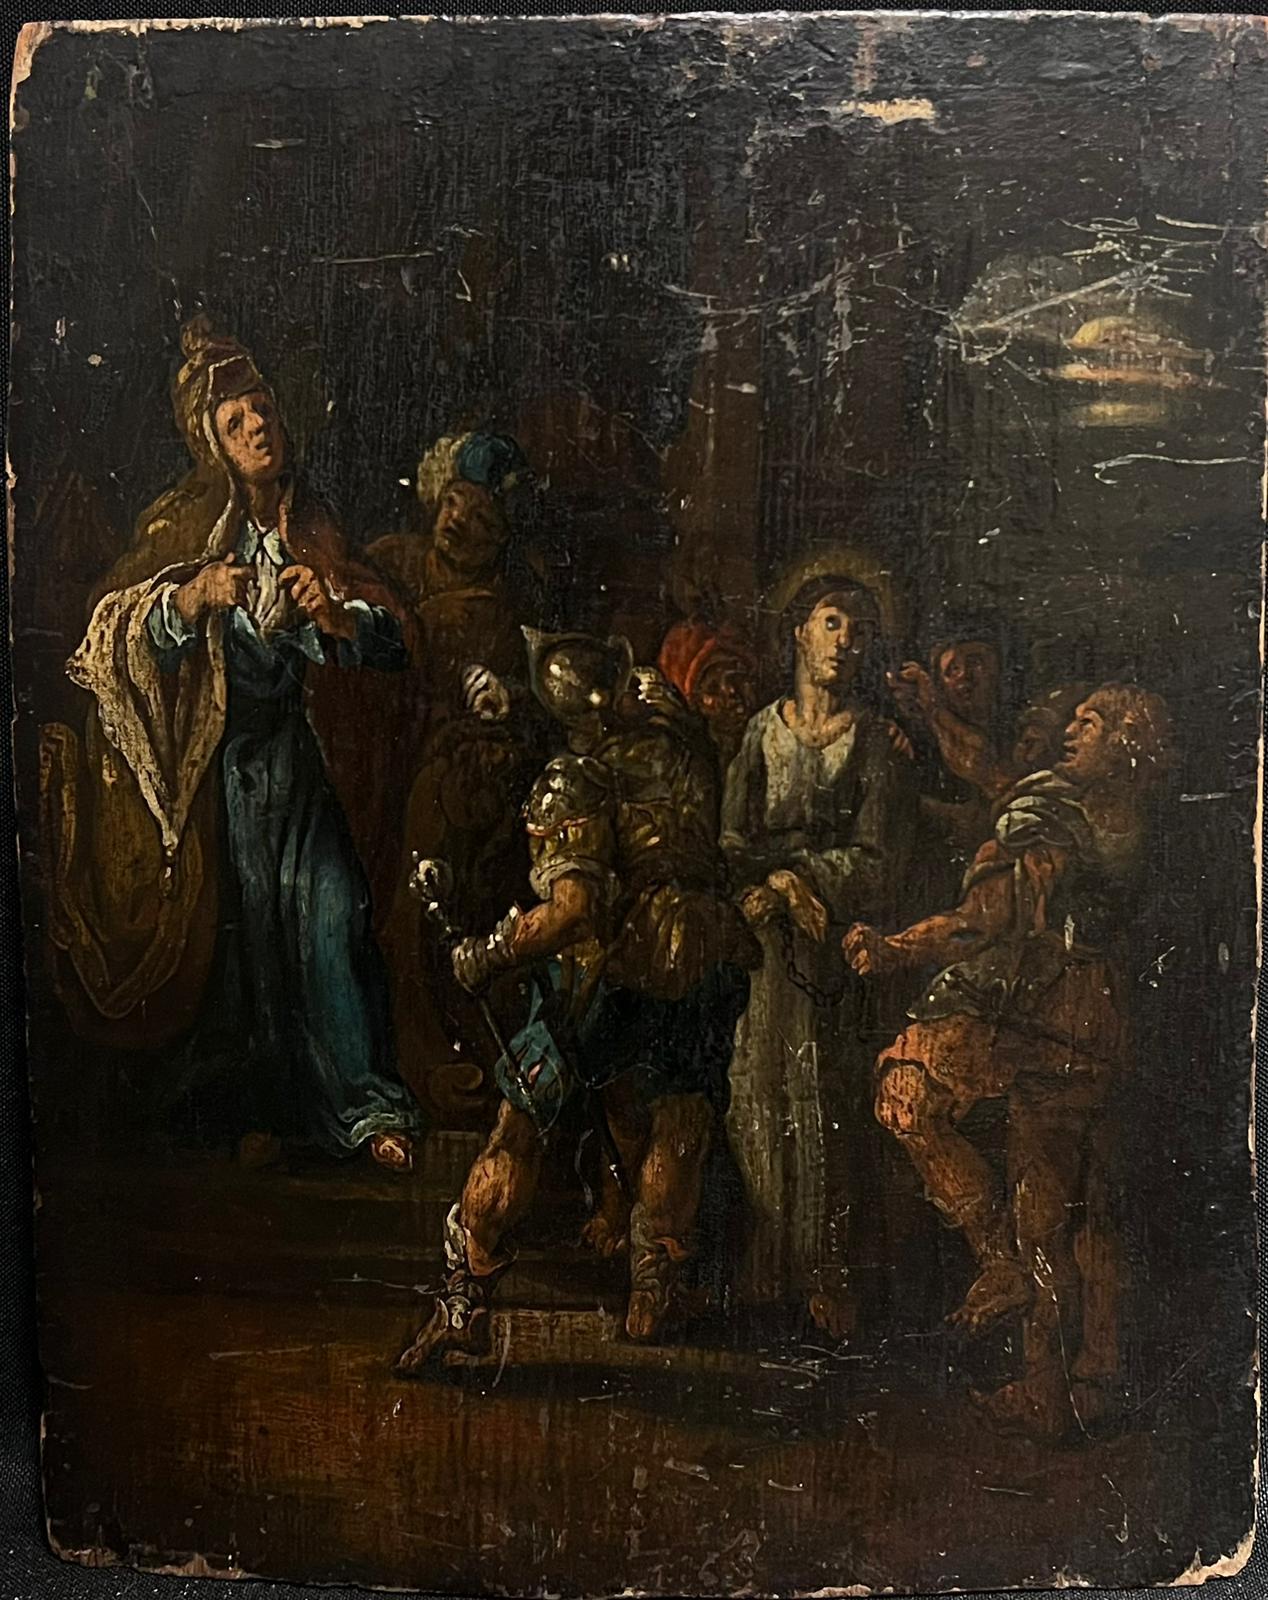 Fine Quality 17th Century Dutch Old Master Oil on Wood Panel Trial of Christ - Black Portrait Painting by Dutch 17th Century